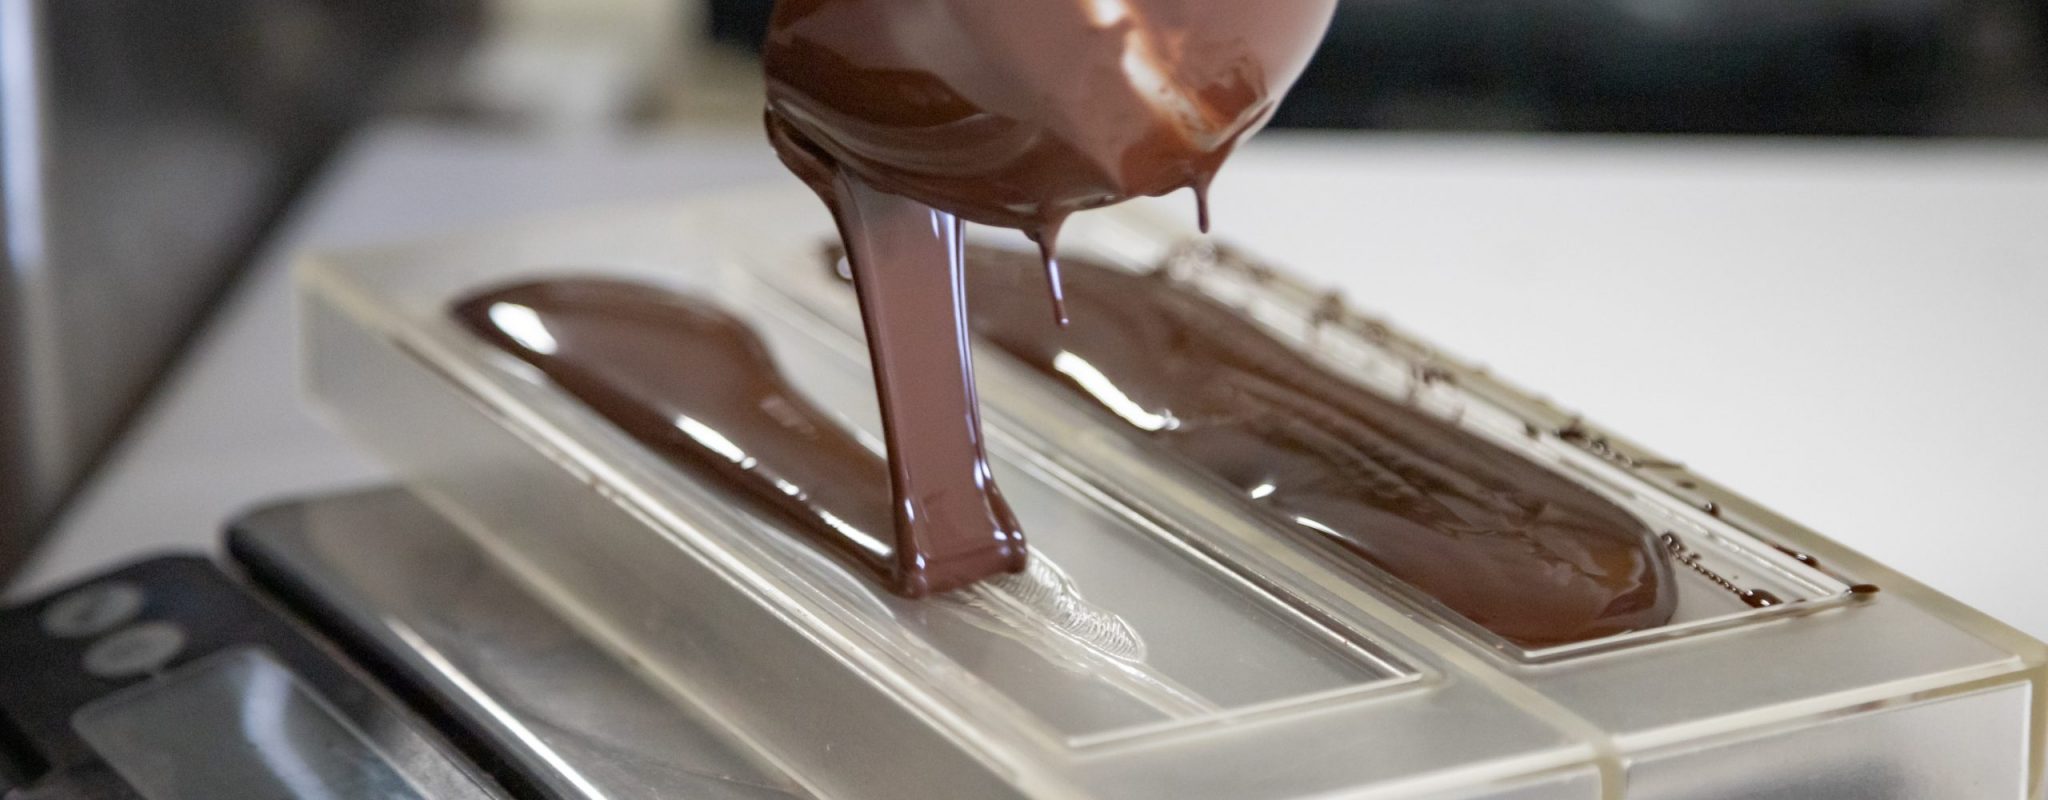 Pouring chocolate into bars